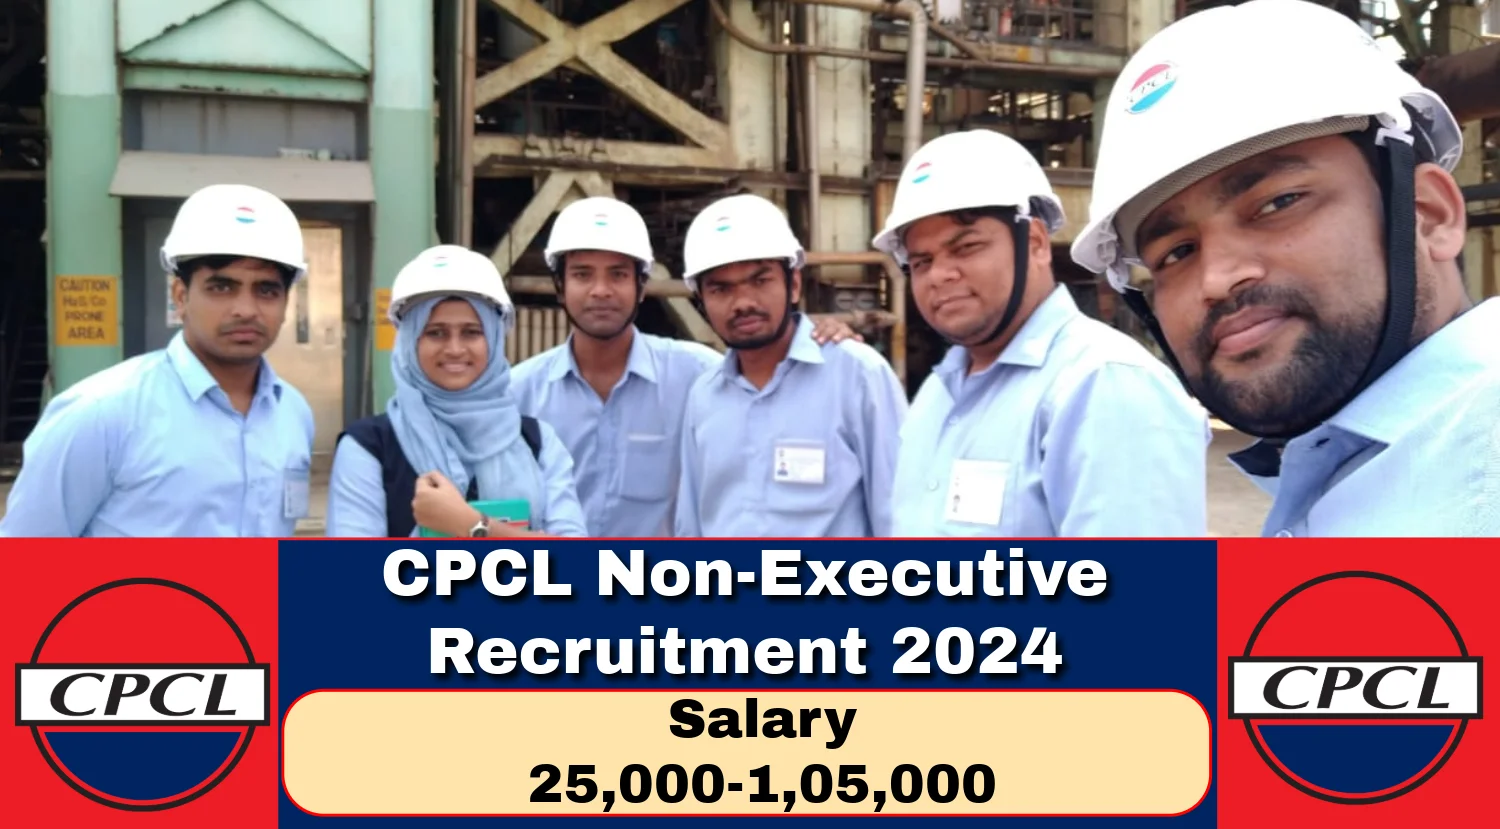 CPCL Non-Executive Recruitment 2024 Notification Out, Check Eligibility, Vacancy details and Apply Now at cpcl.co.in